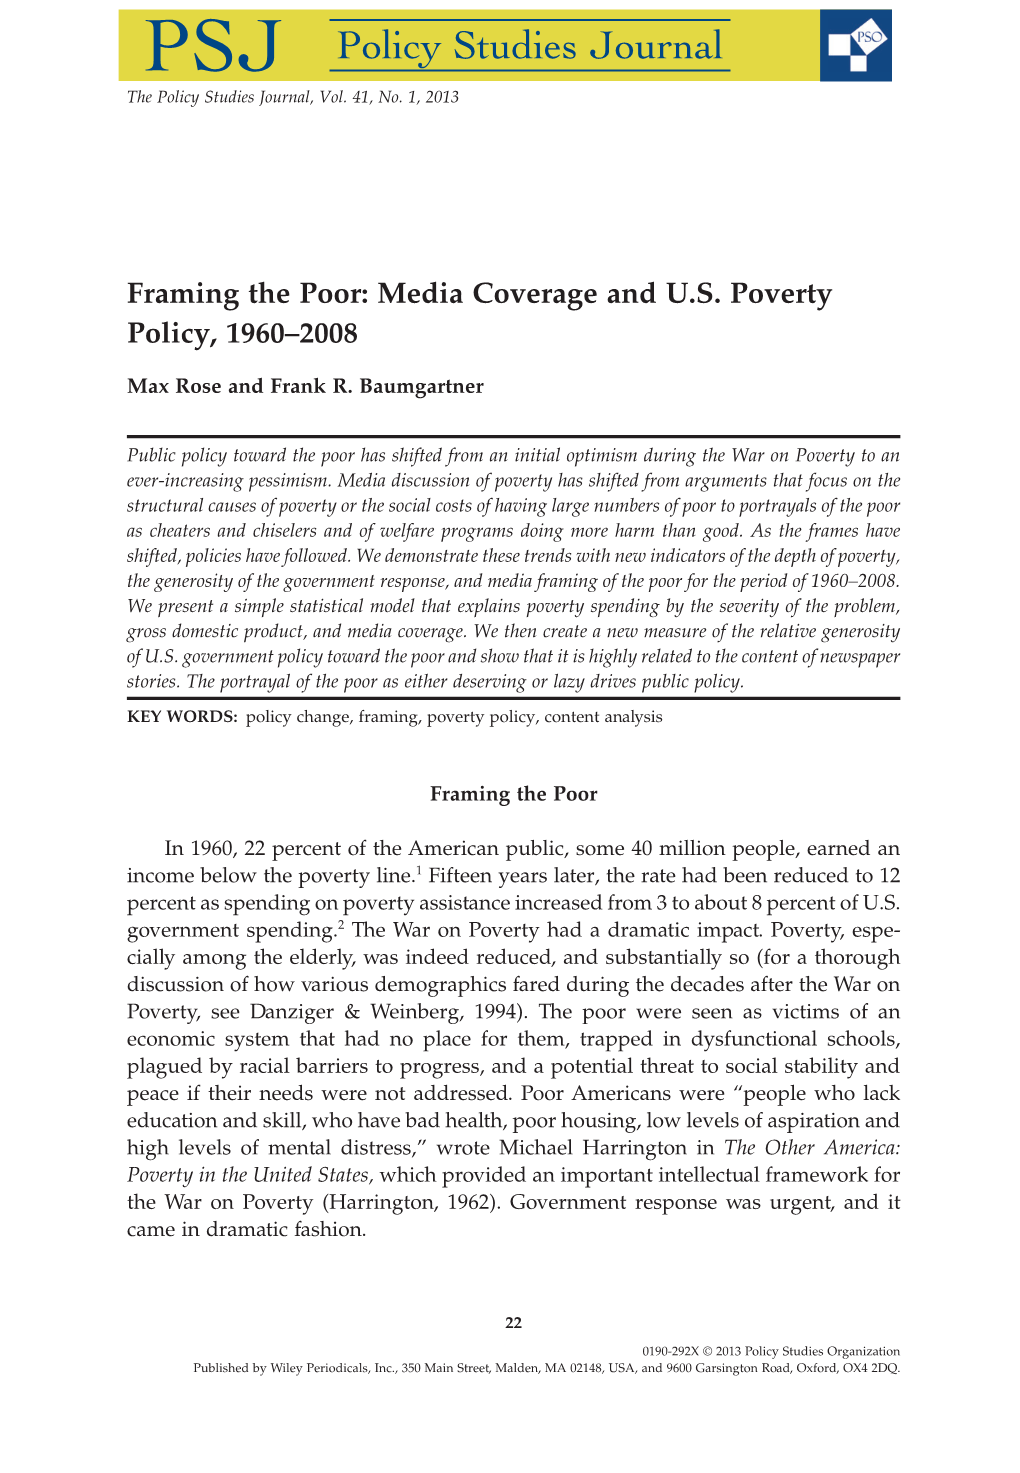 Framing the Poor: Media Coverage and US Poverty Policy, 1960-2008